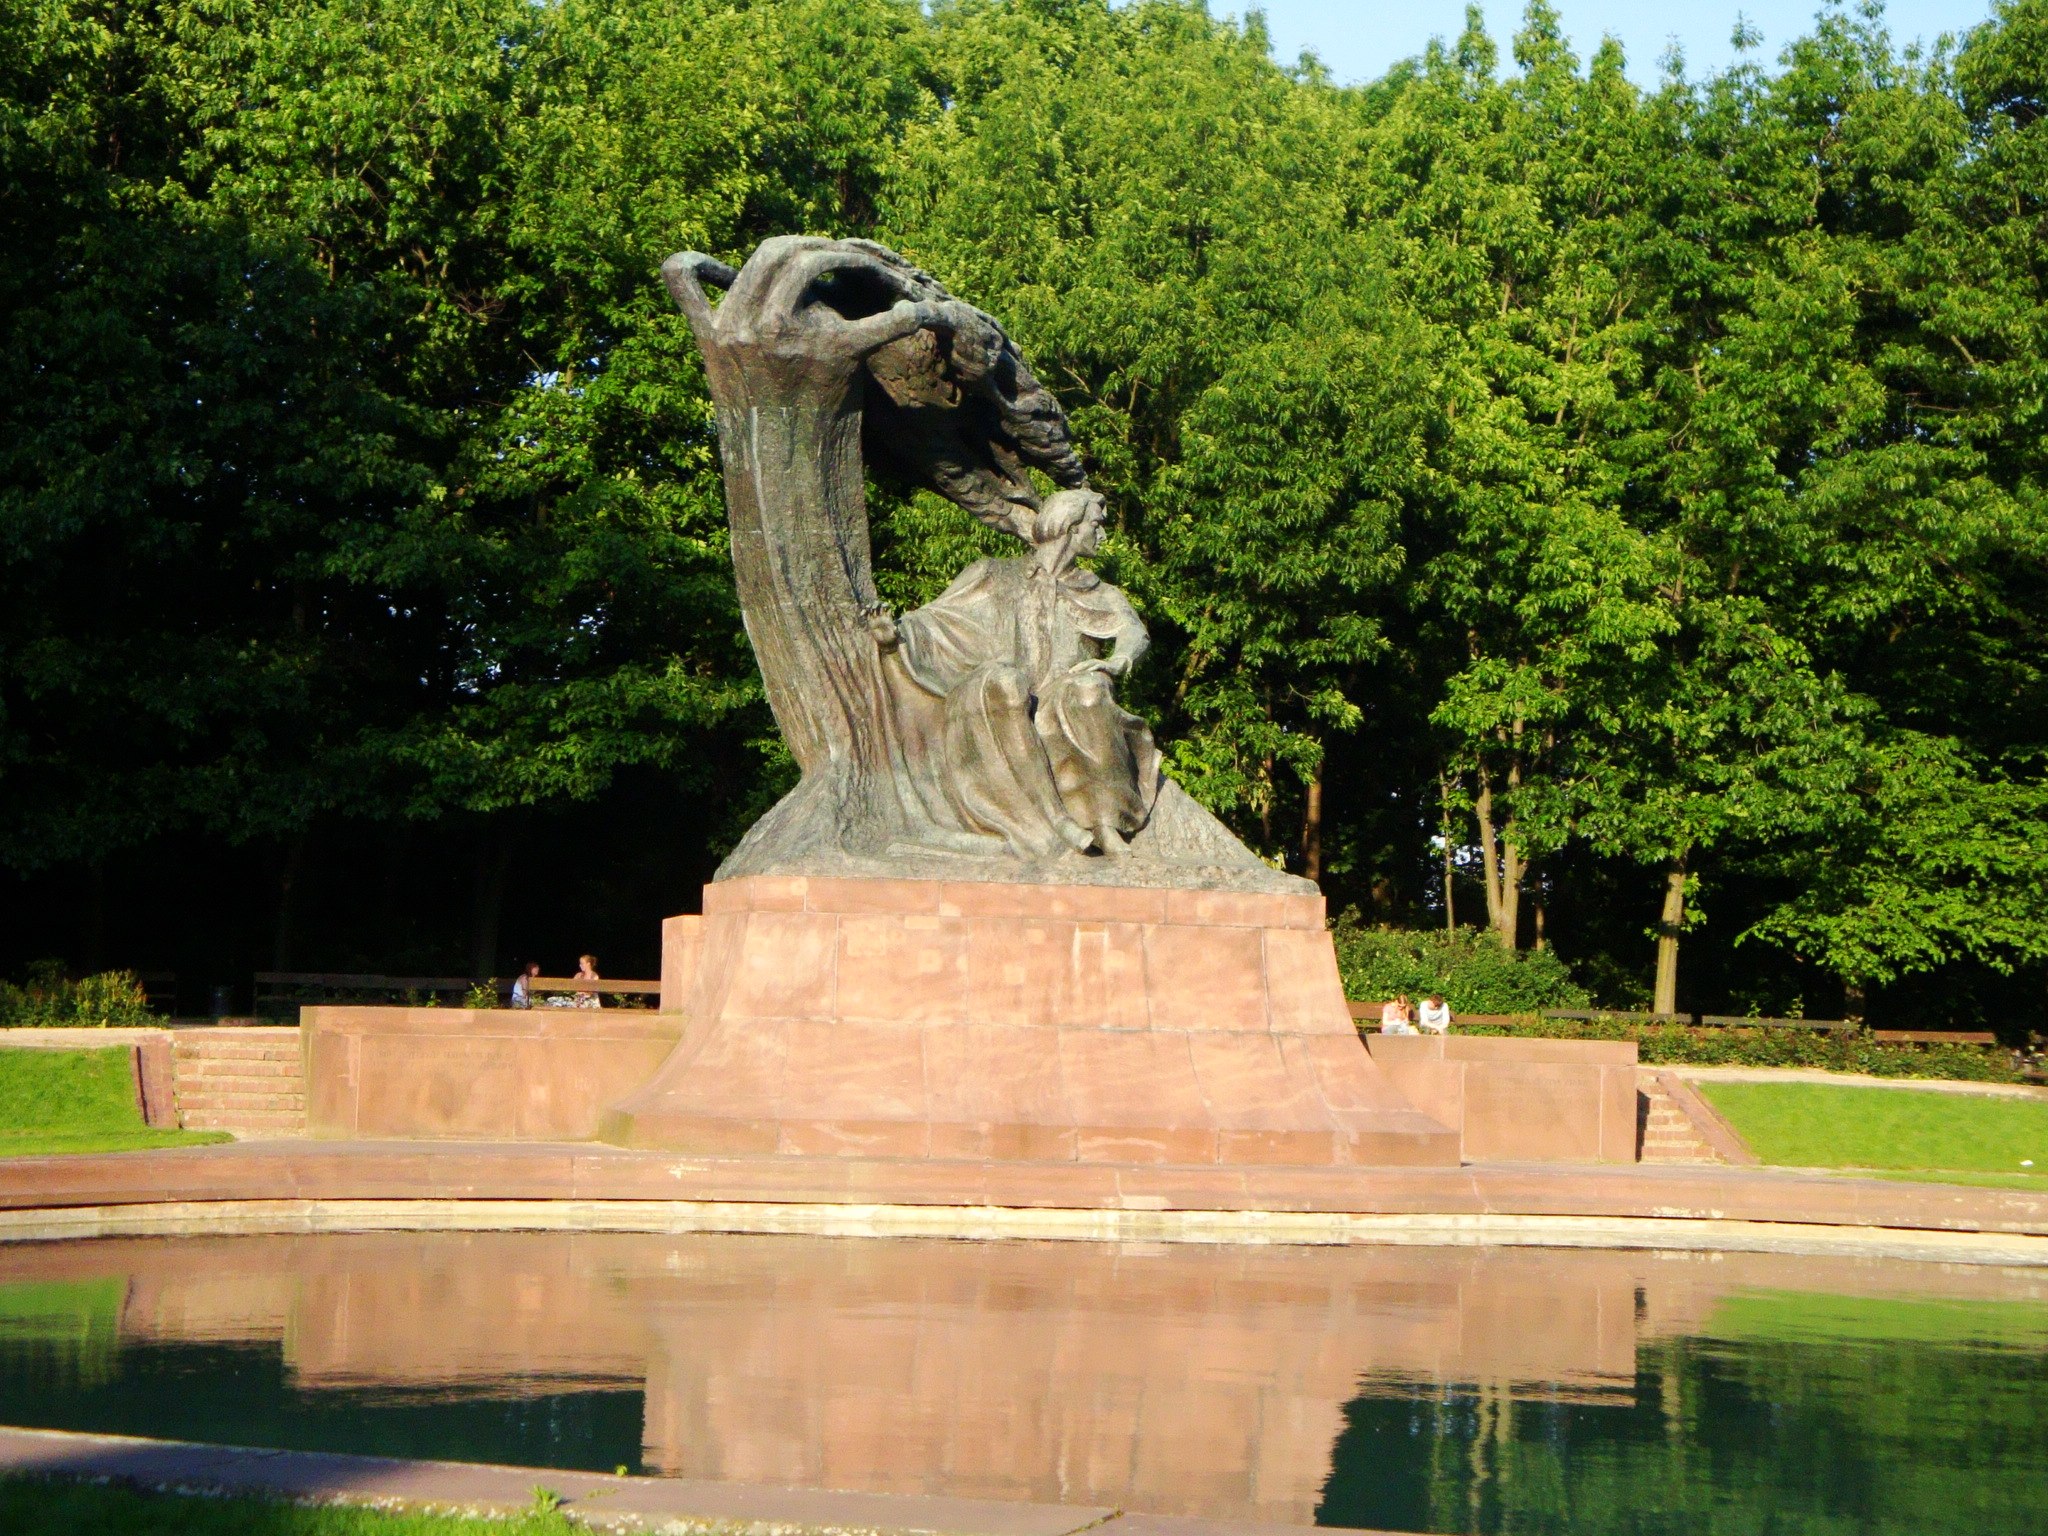 an interesting statue near the water features some large leaves